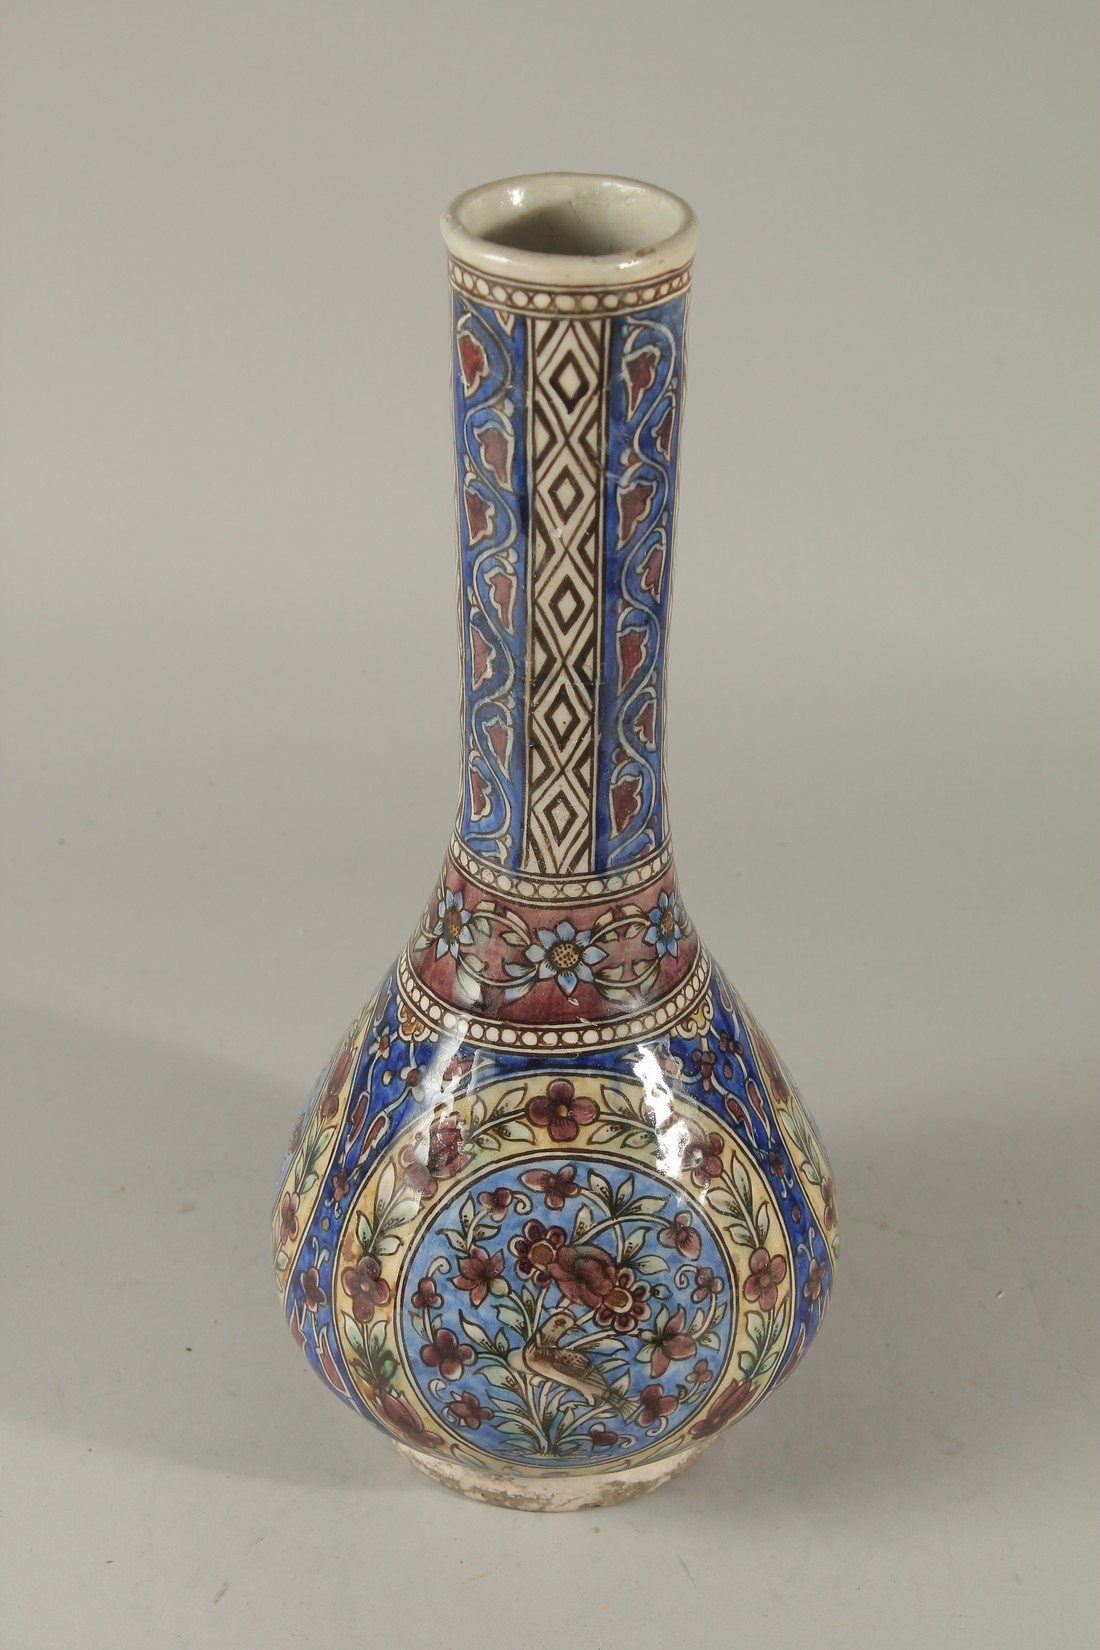 A PERSIAN QAJAR GLAZED POTTERY VASE, painted with panels depicting a bird amongst flora, further